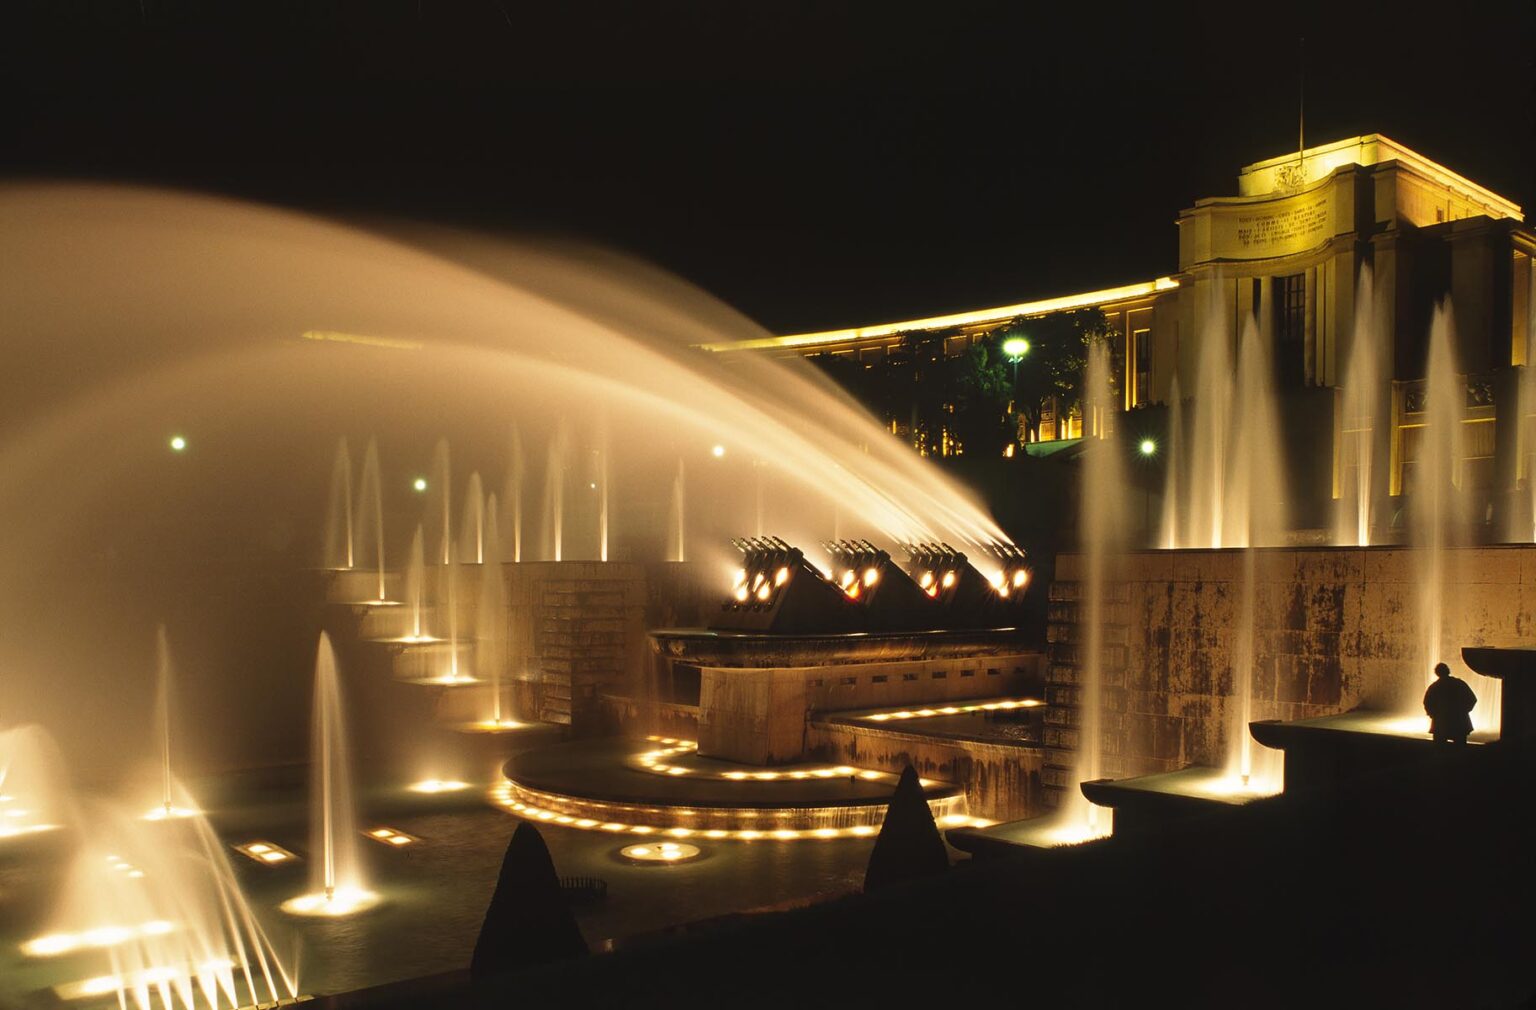 Night shot of the The PALACE OF CHAILLON  Fountains- PARIS, FRANCE